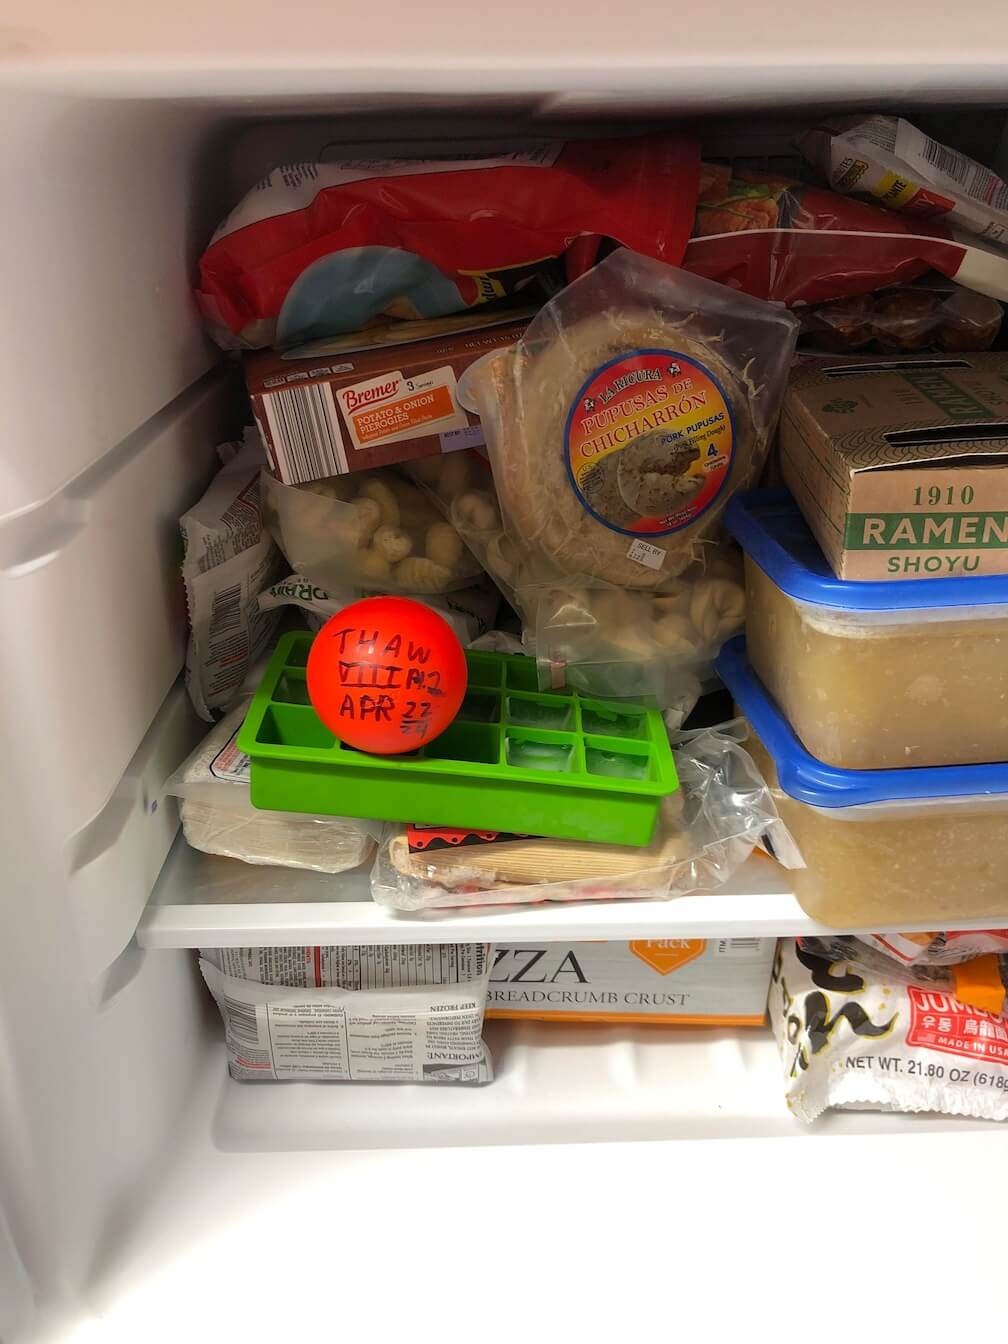 a ball in a freezer with "That VIII Pt 2, April 22-24" written on it